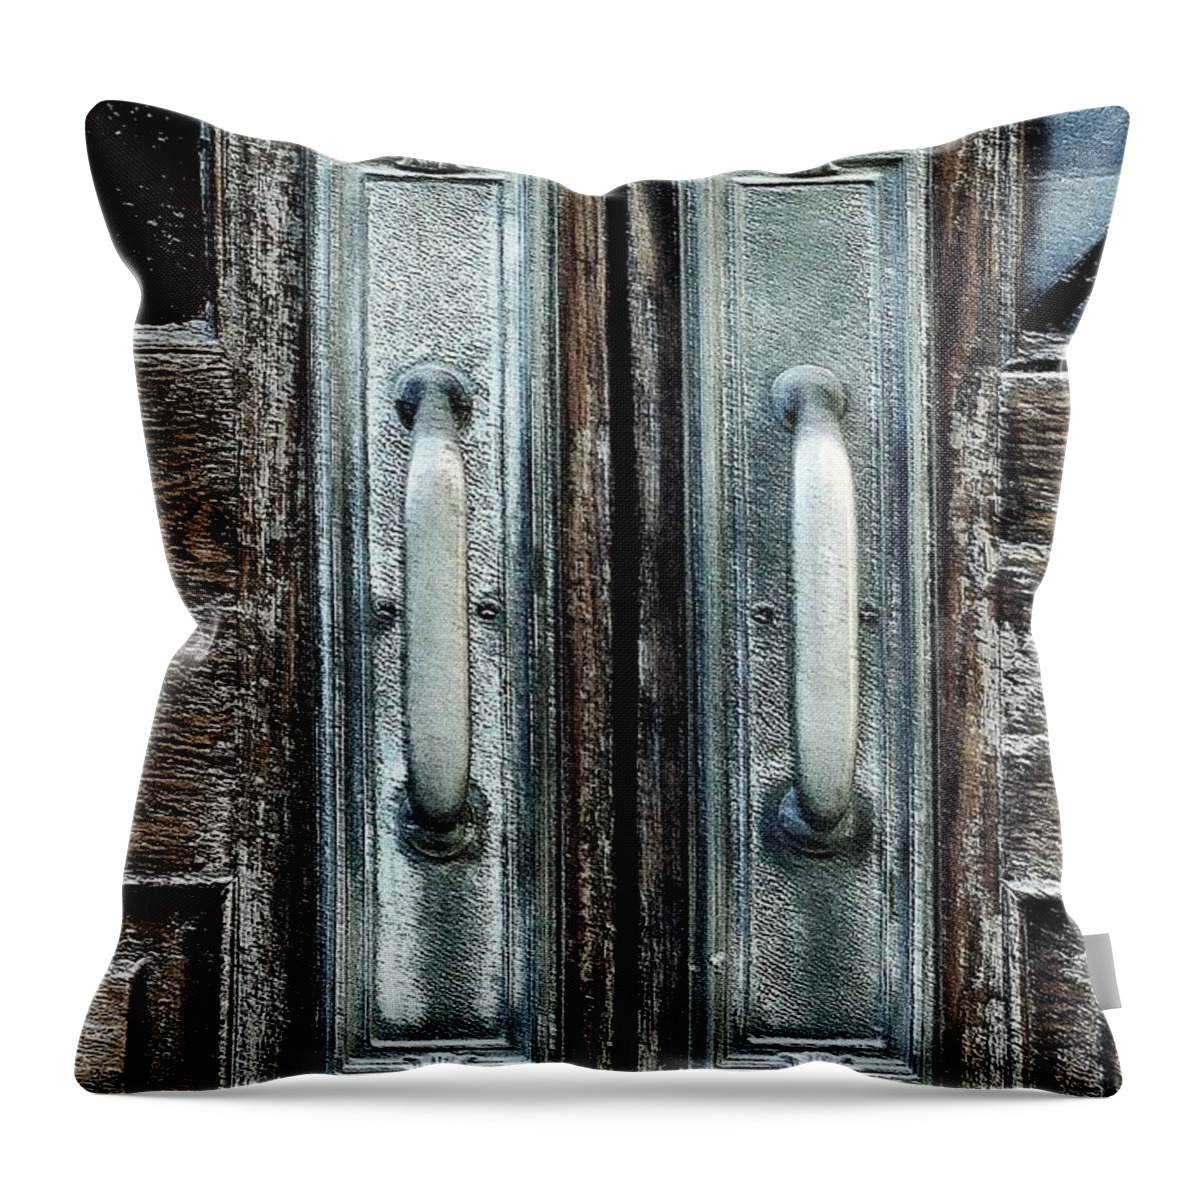 Door Throw Pillow featuring the photograph Architecture 2 by Carol Jorgensen